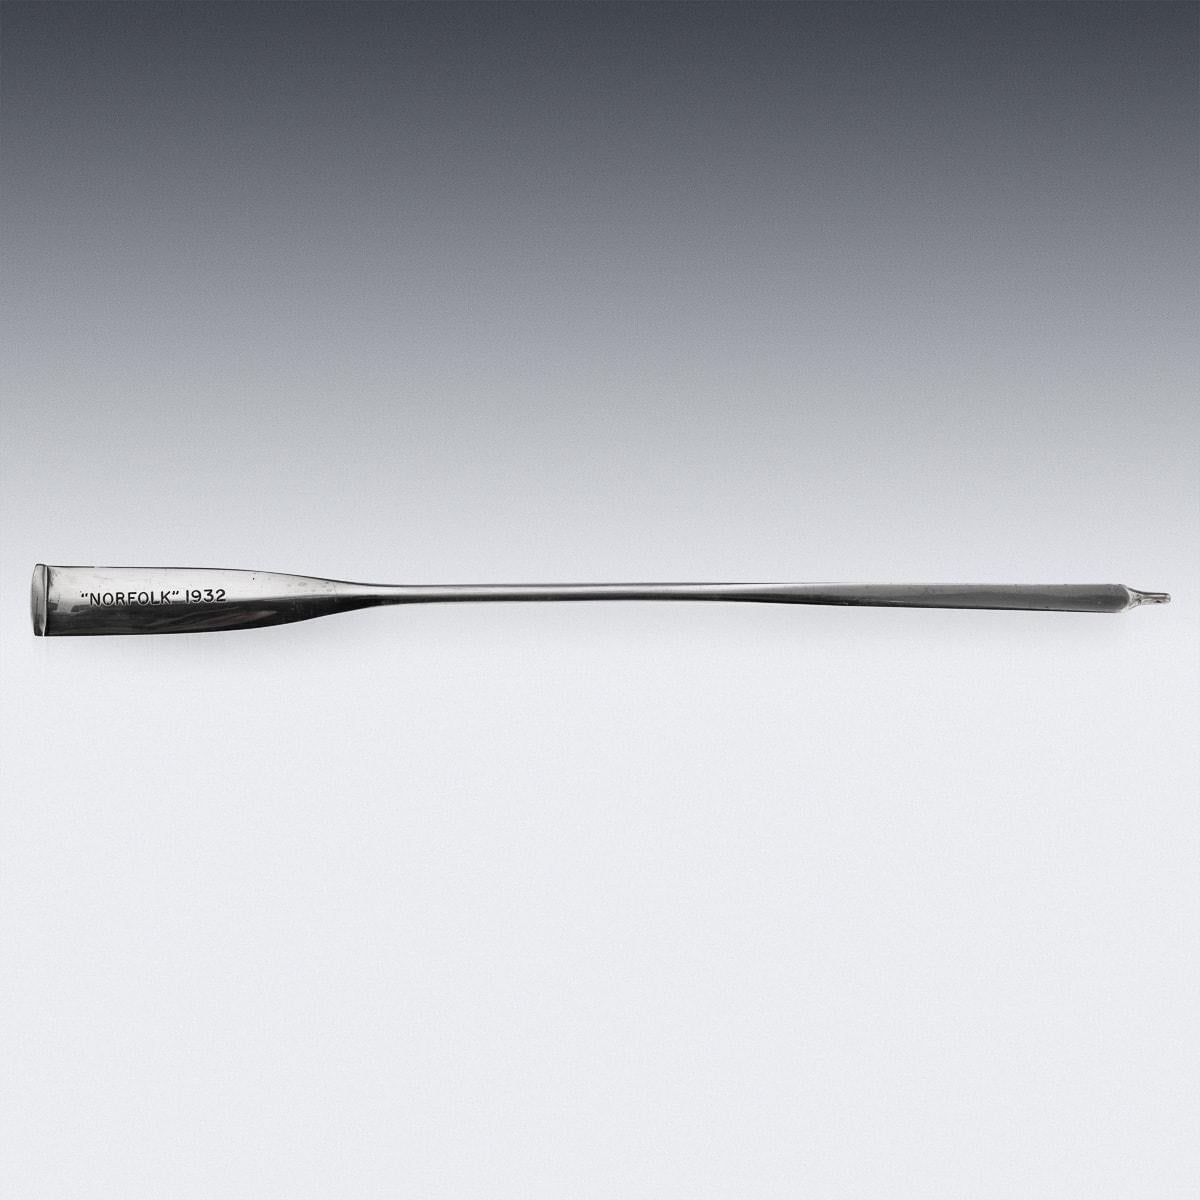 An English made H.M.S. NORFOLK. A Fine George V Silver 'Presentation Oar' Cocktail Stirrer. The other end is hallmarked English Silver (925 standard), Birmingham, year 1931 (G), Makers mark NA&AFI (Navy, Army & Air Force Institute).

CONDITION
In